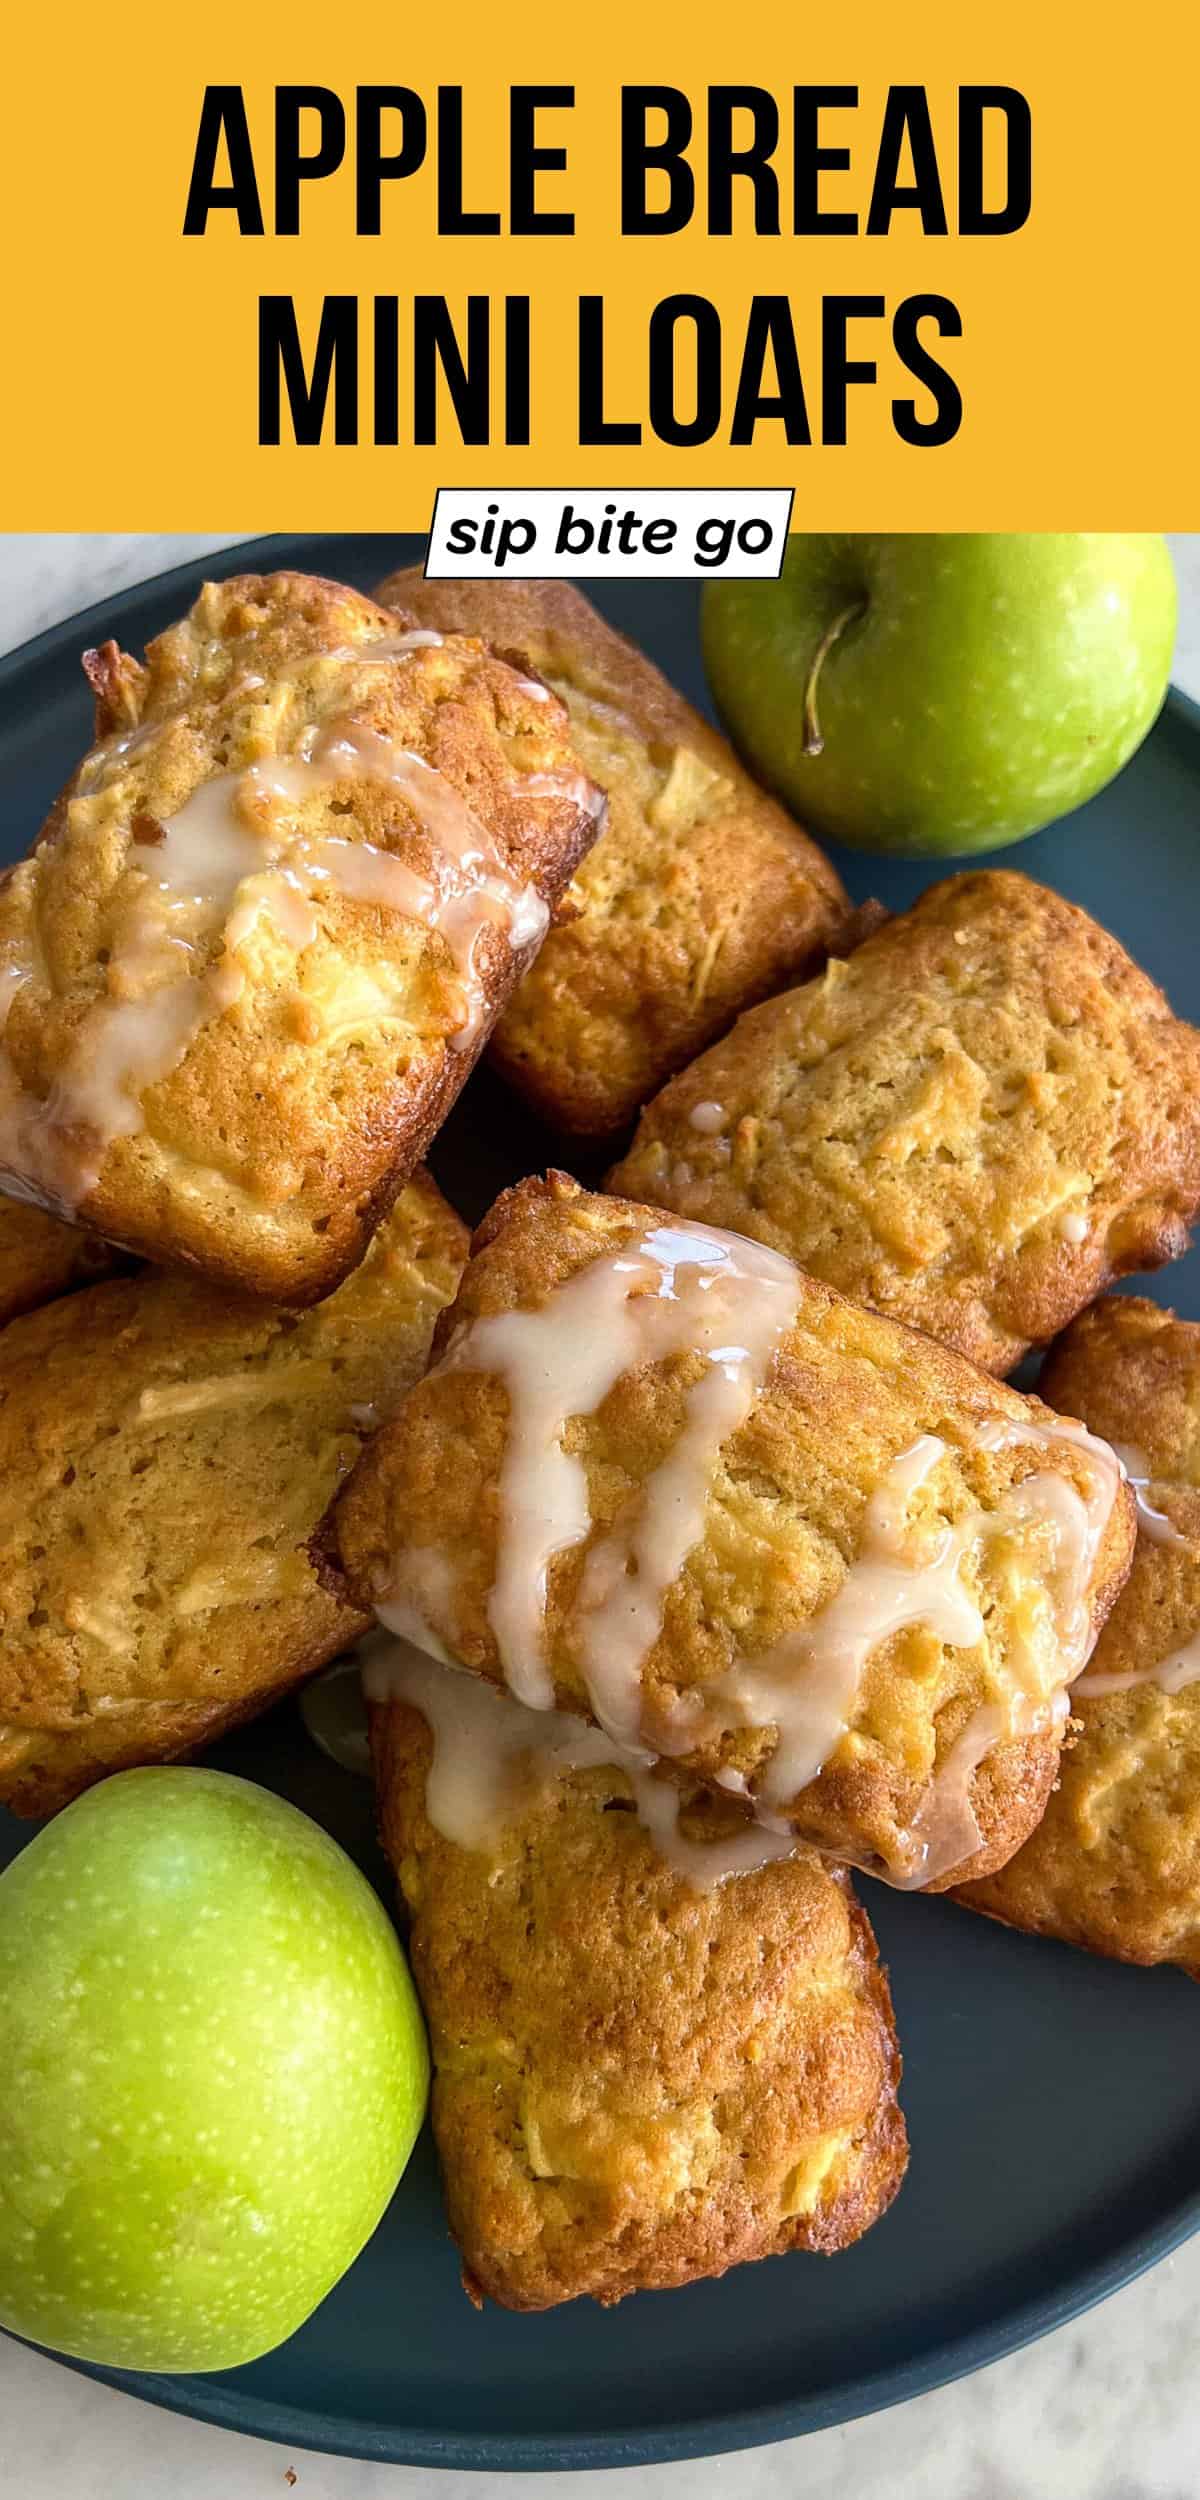 Apple Bread Mini Loaves recipe image with text overlay